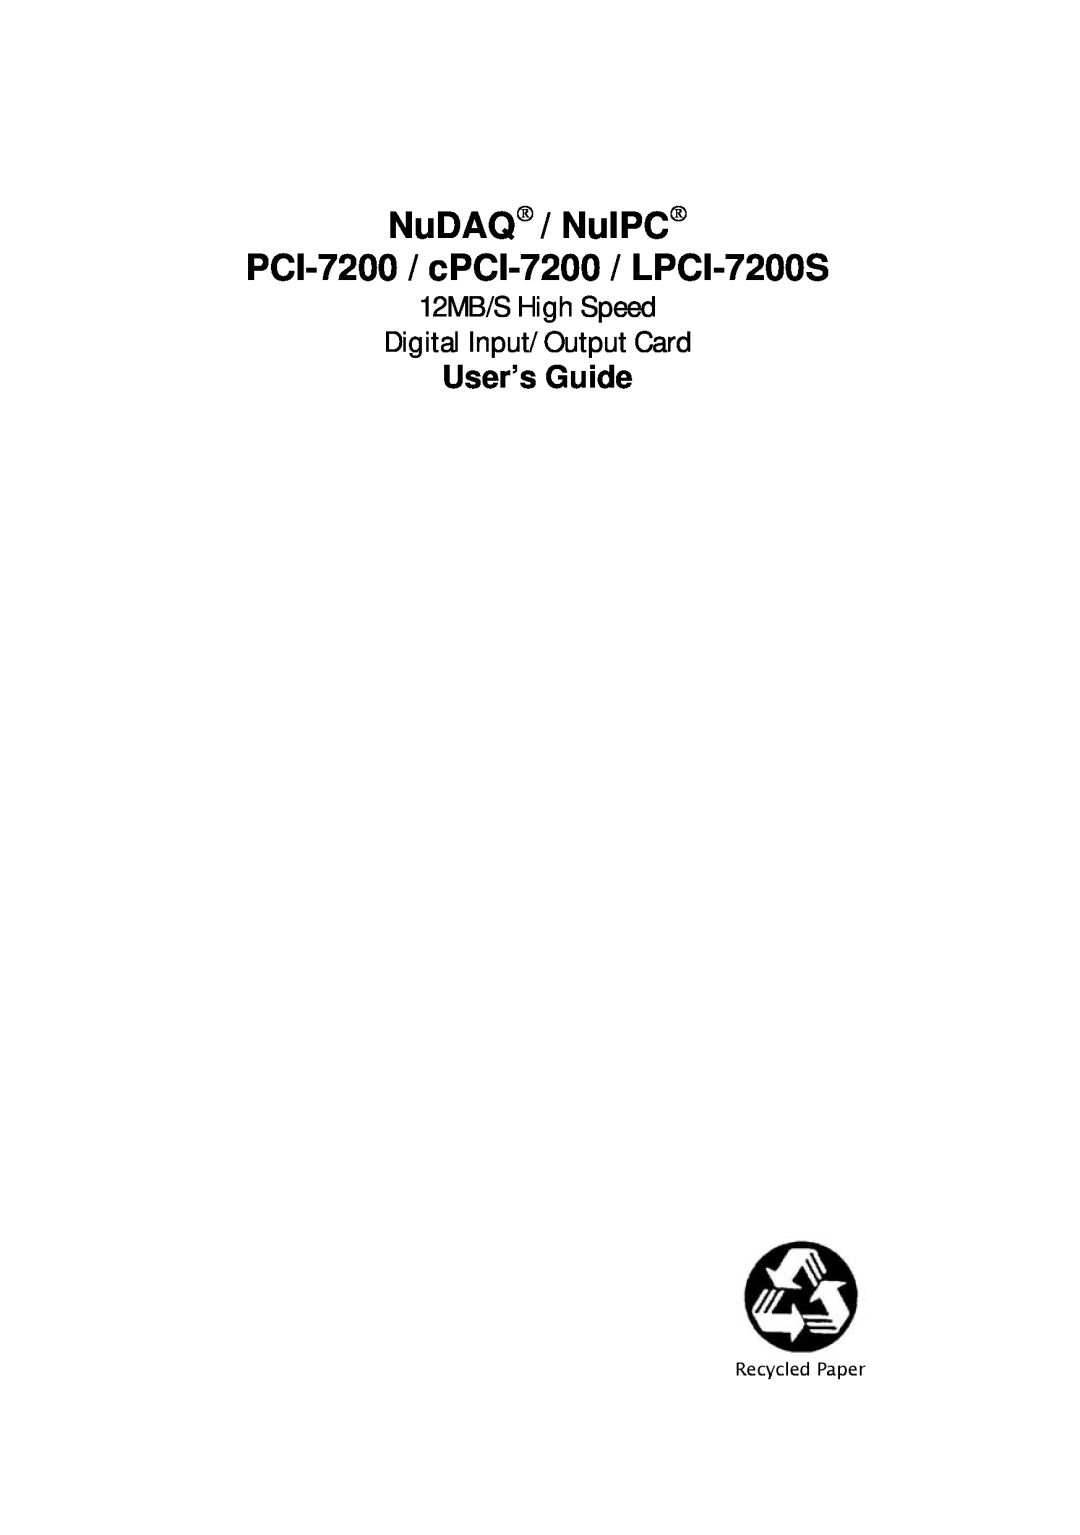 Intel LPCI-7200S manual 12MB/S High Speed Digital Input/ Output Card User’s Guide, Recycled Paper 